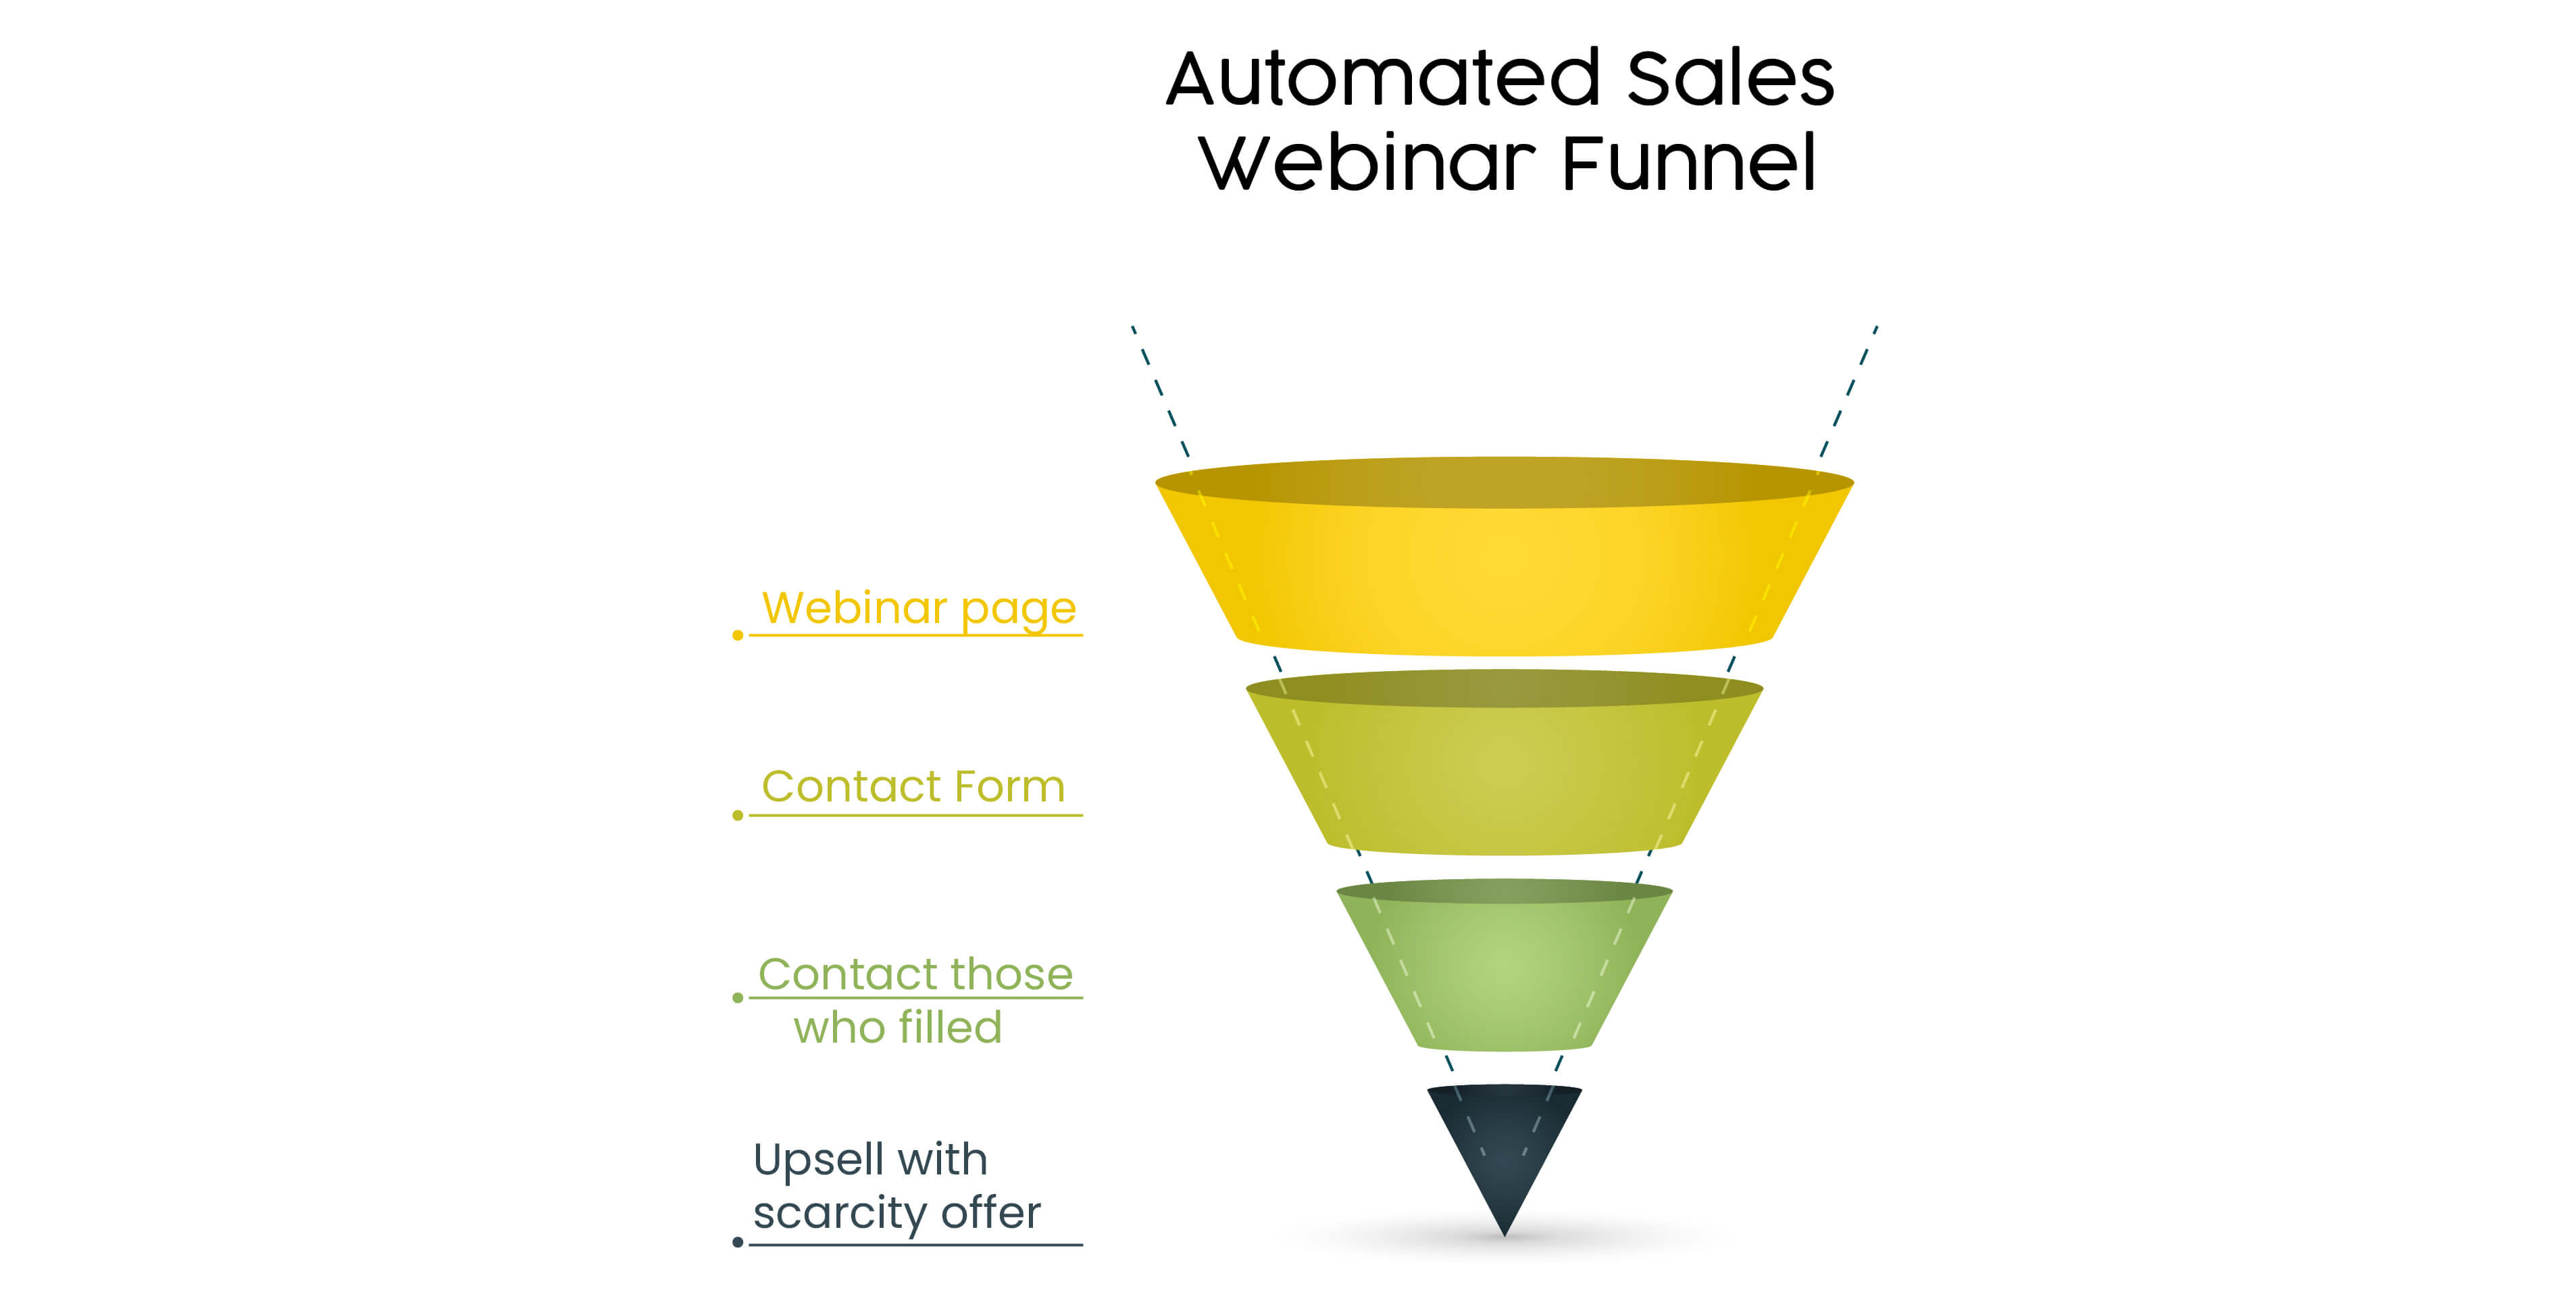 Automated sales webinar funnel